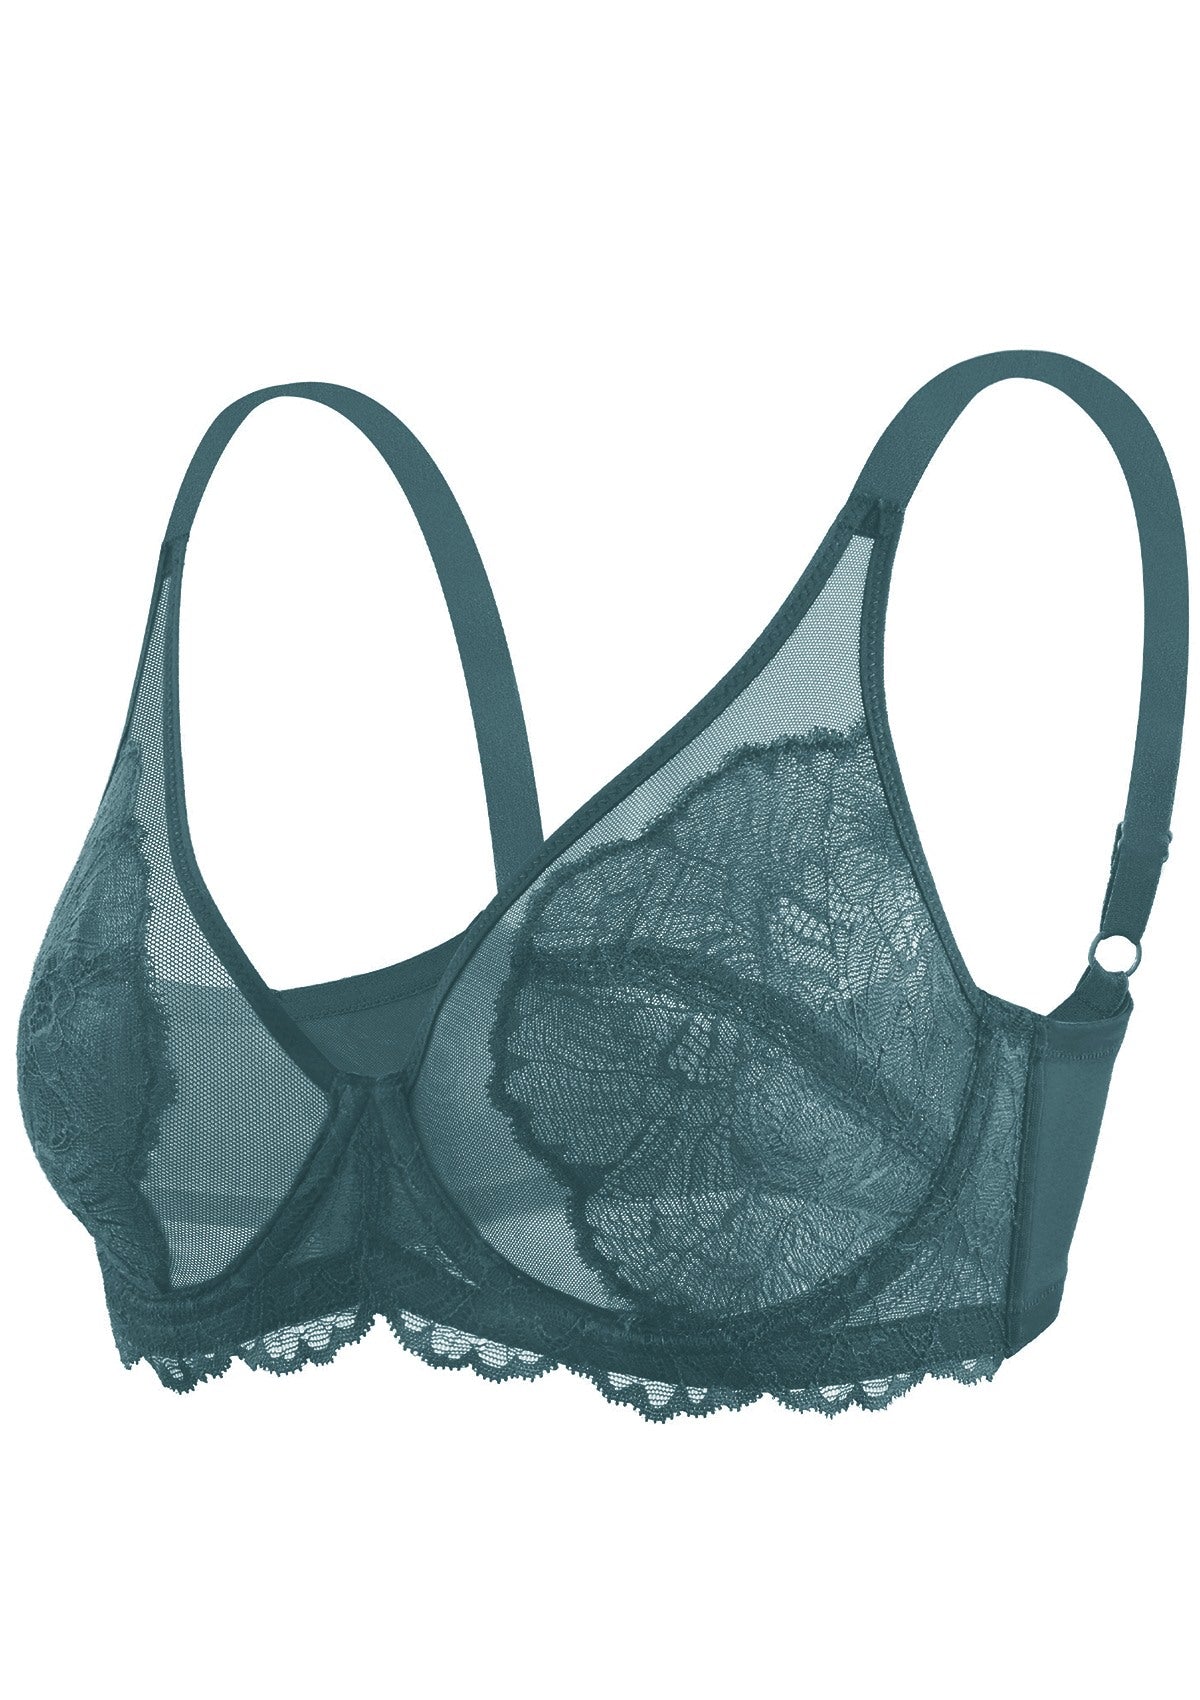 HSIA Blossom Full Figure See-Through Lace Bra For Side And Back Fat - Dark Blue / 38 / C